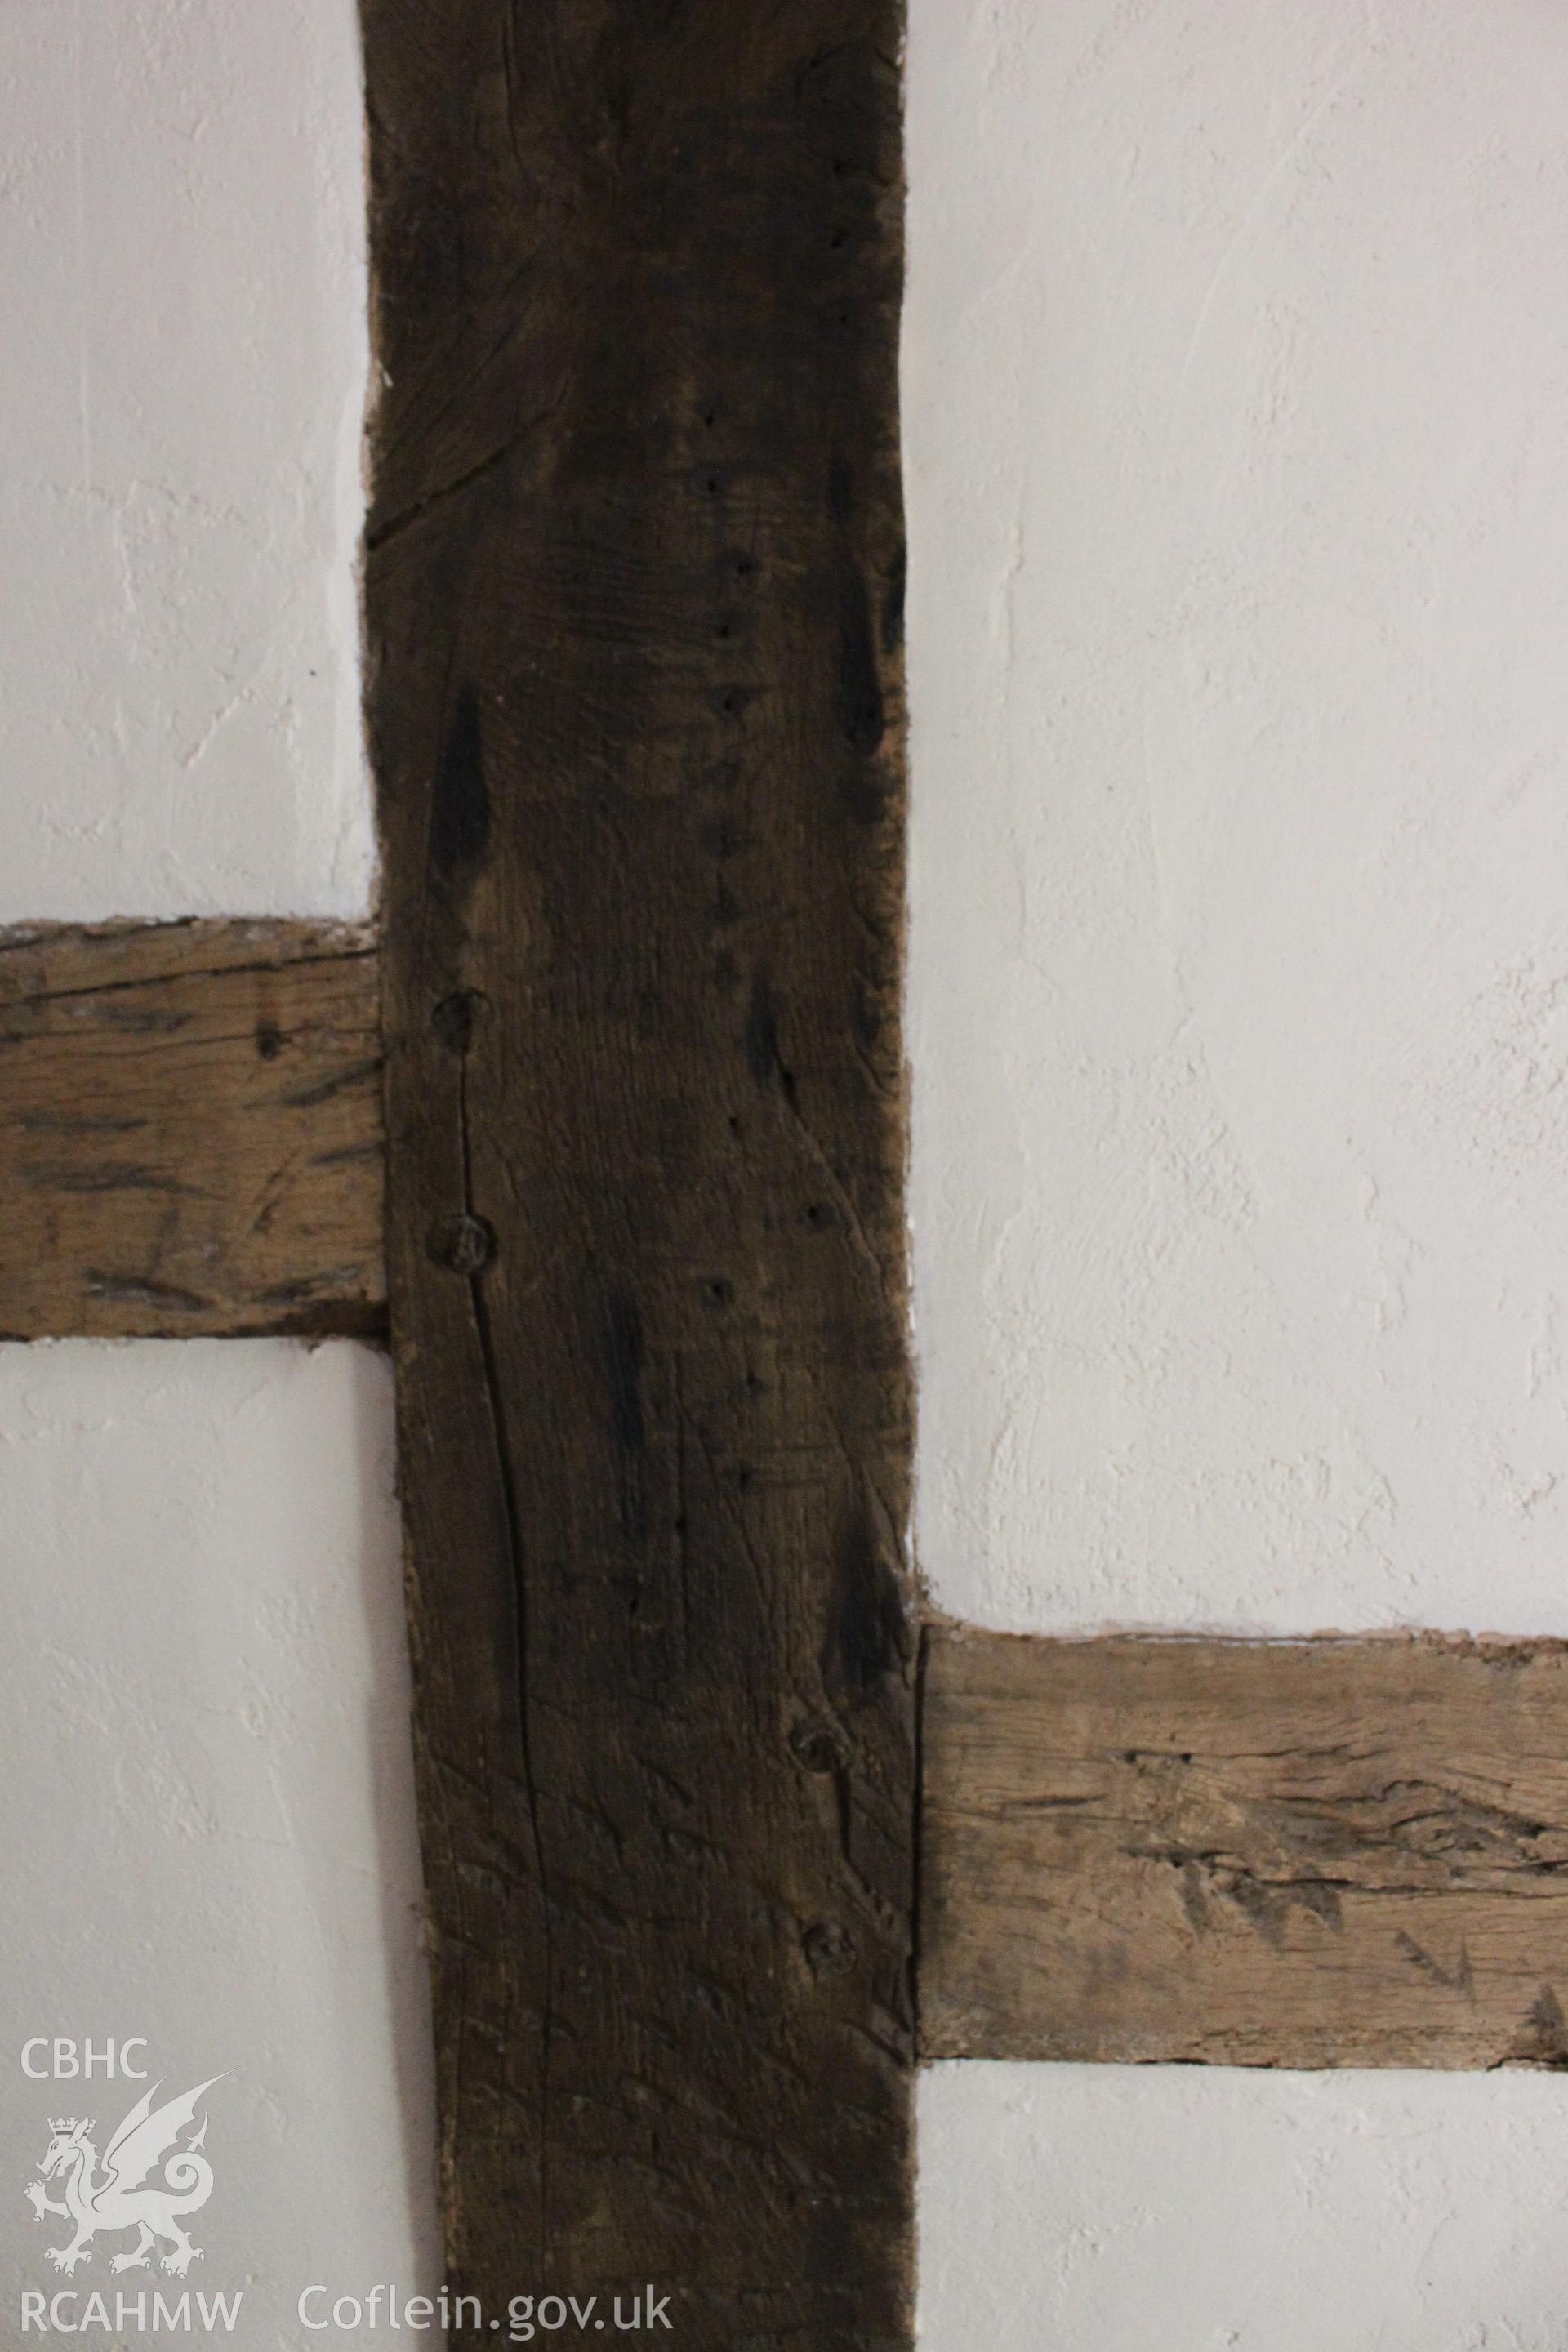 Colour photograph showing detail of detail of timber frame at 5-7 Mwrog Street, Ruthin. Photographed during survey conducted by Geoff Ward on 14th May 2014.